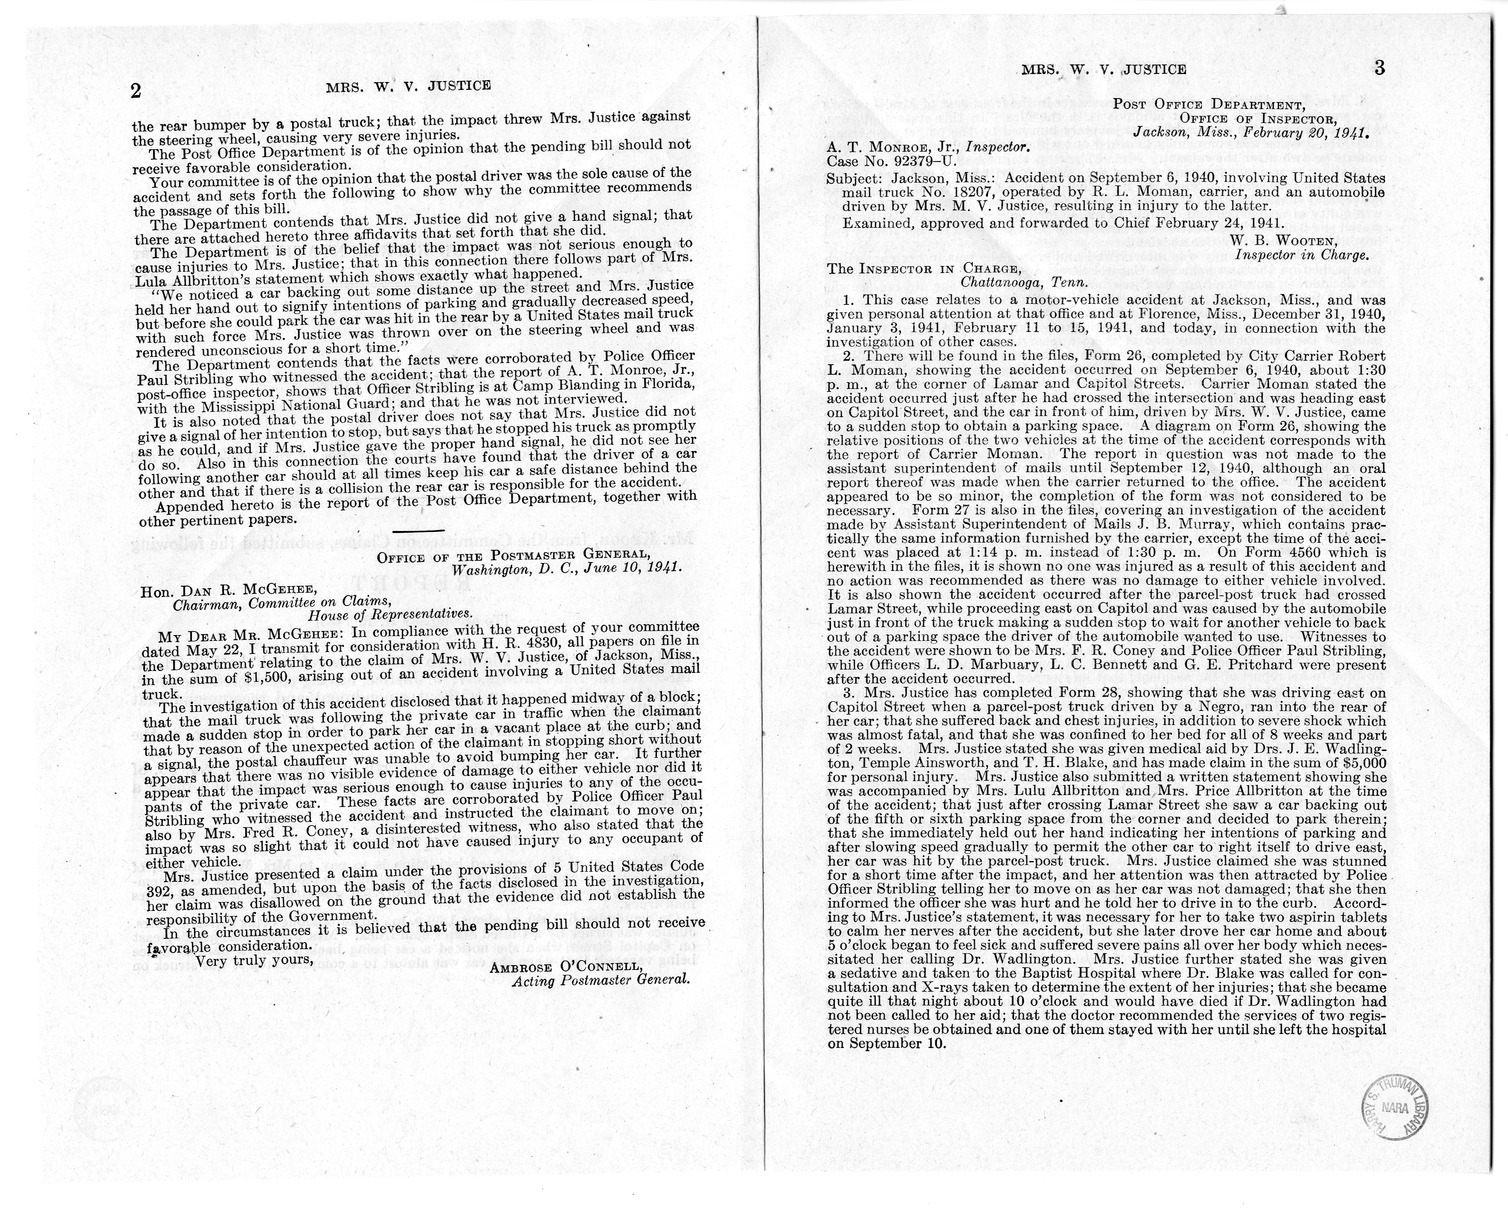 Memorandum from Frederick J. Bailey to M. C. Latta, H.R. 1483, For the Relief of Mrs. W. V. Justice, with Attachments